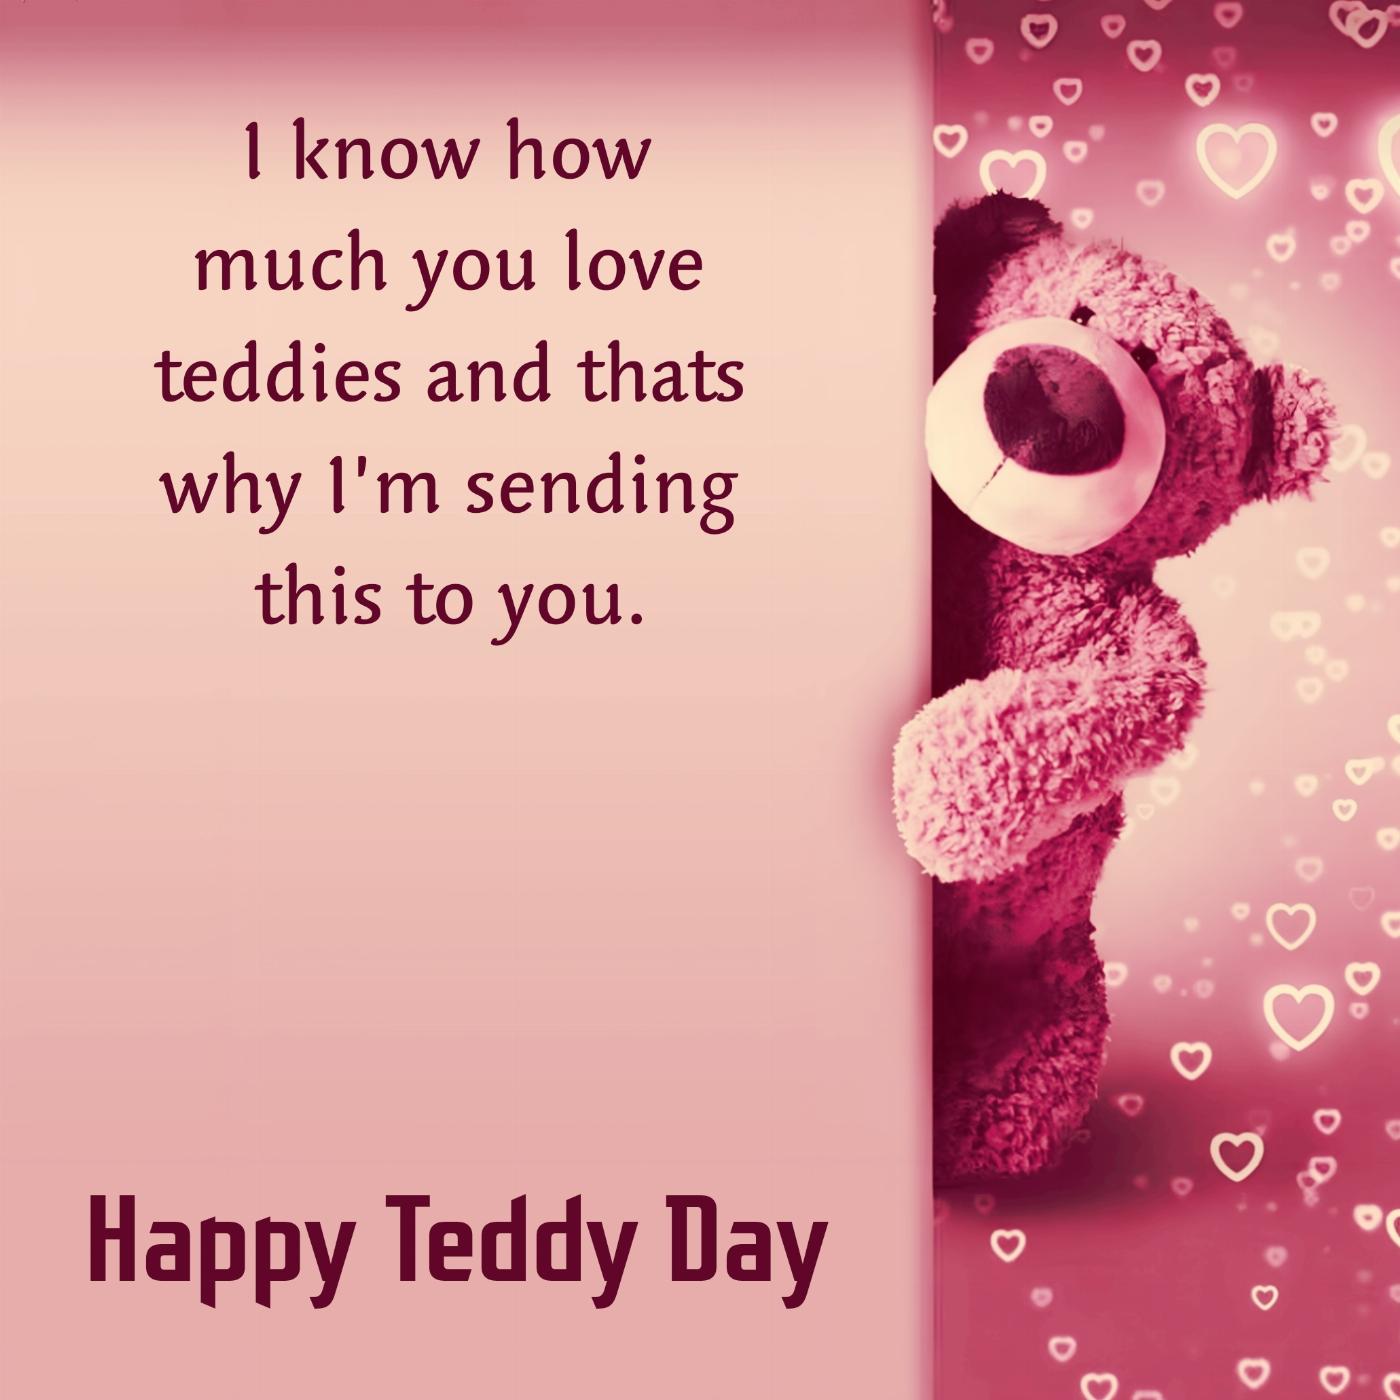 I know how much you love teddies and thats why Im sending